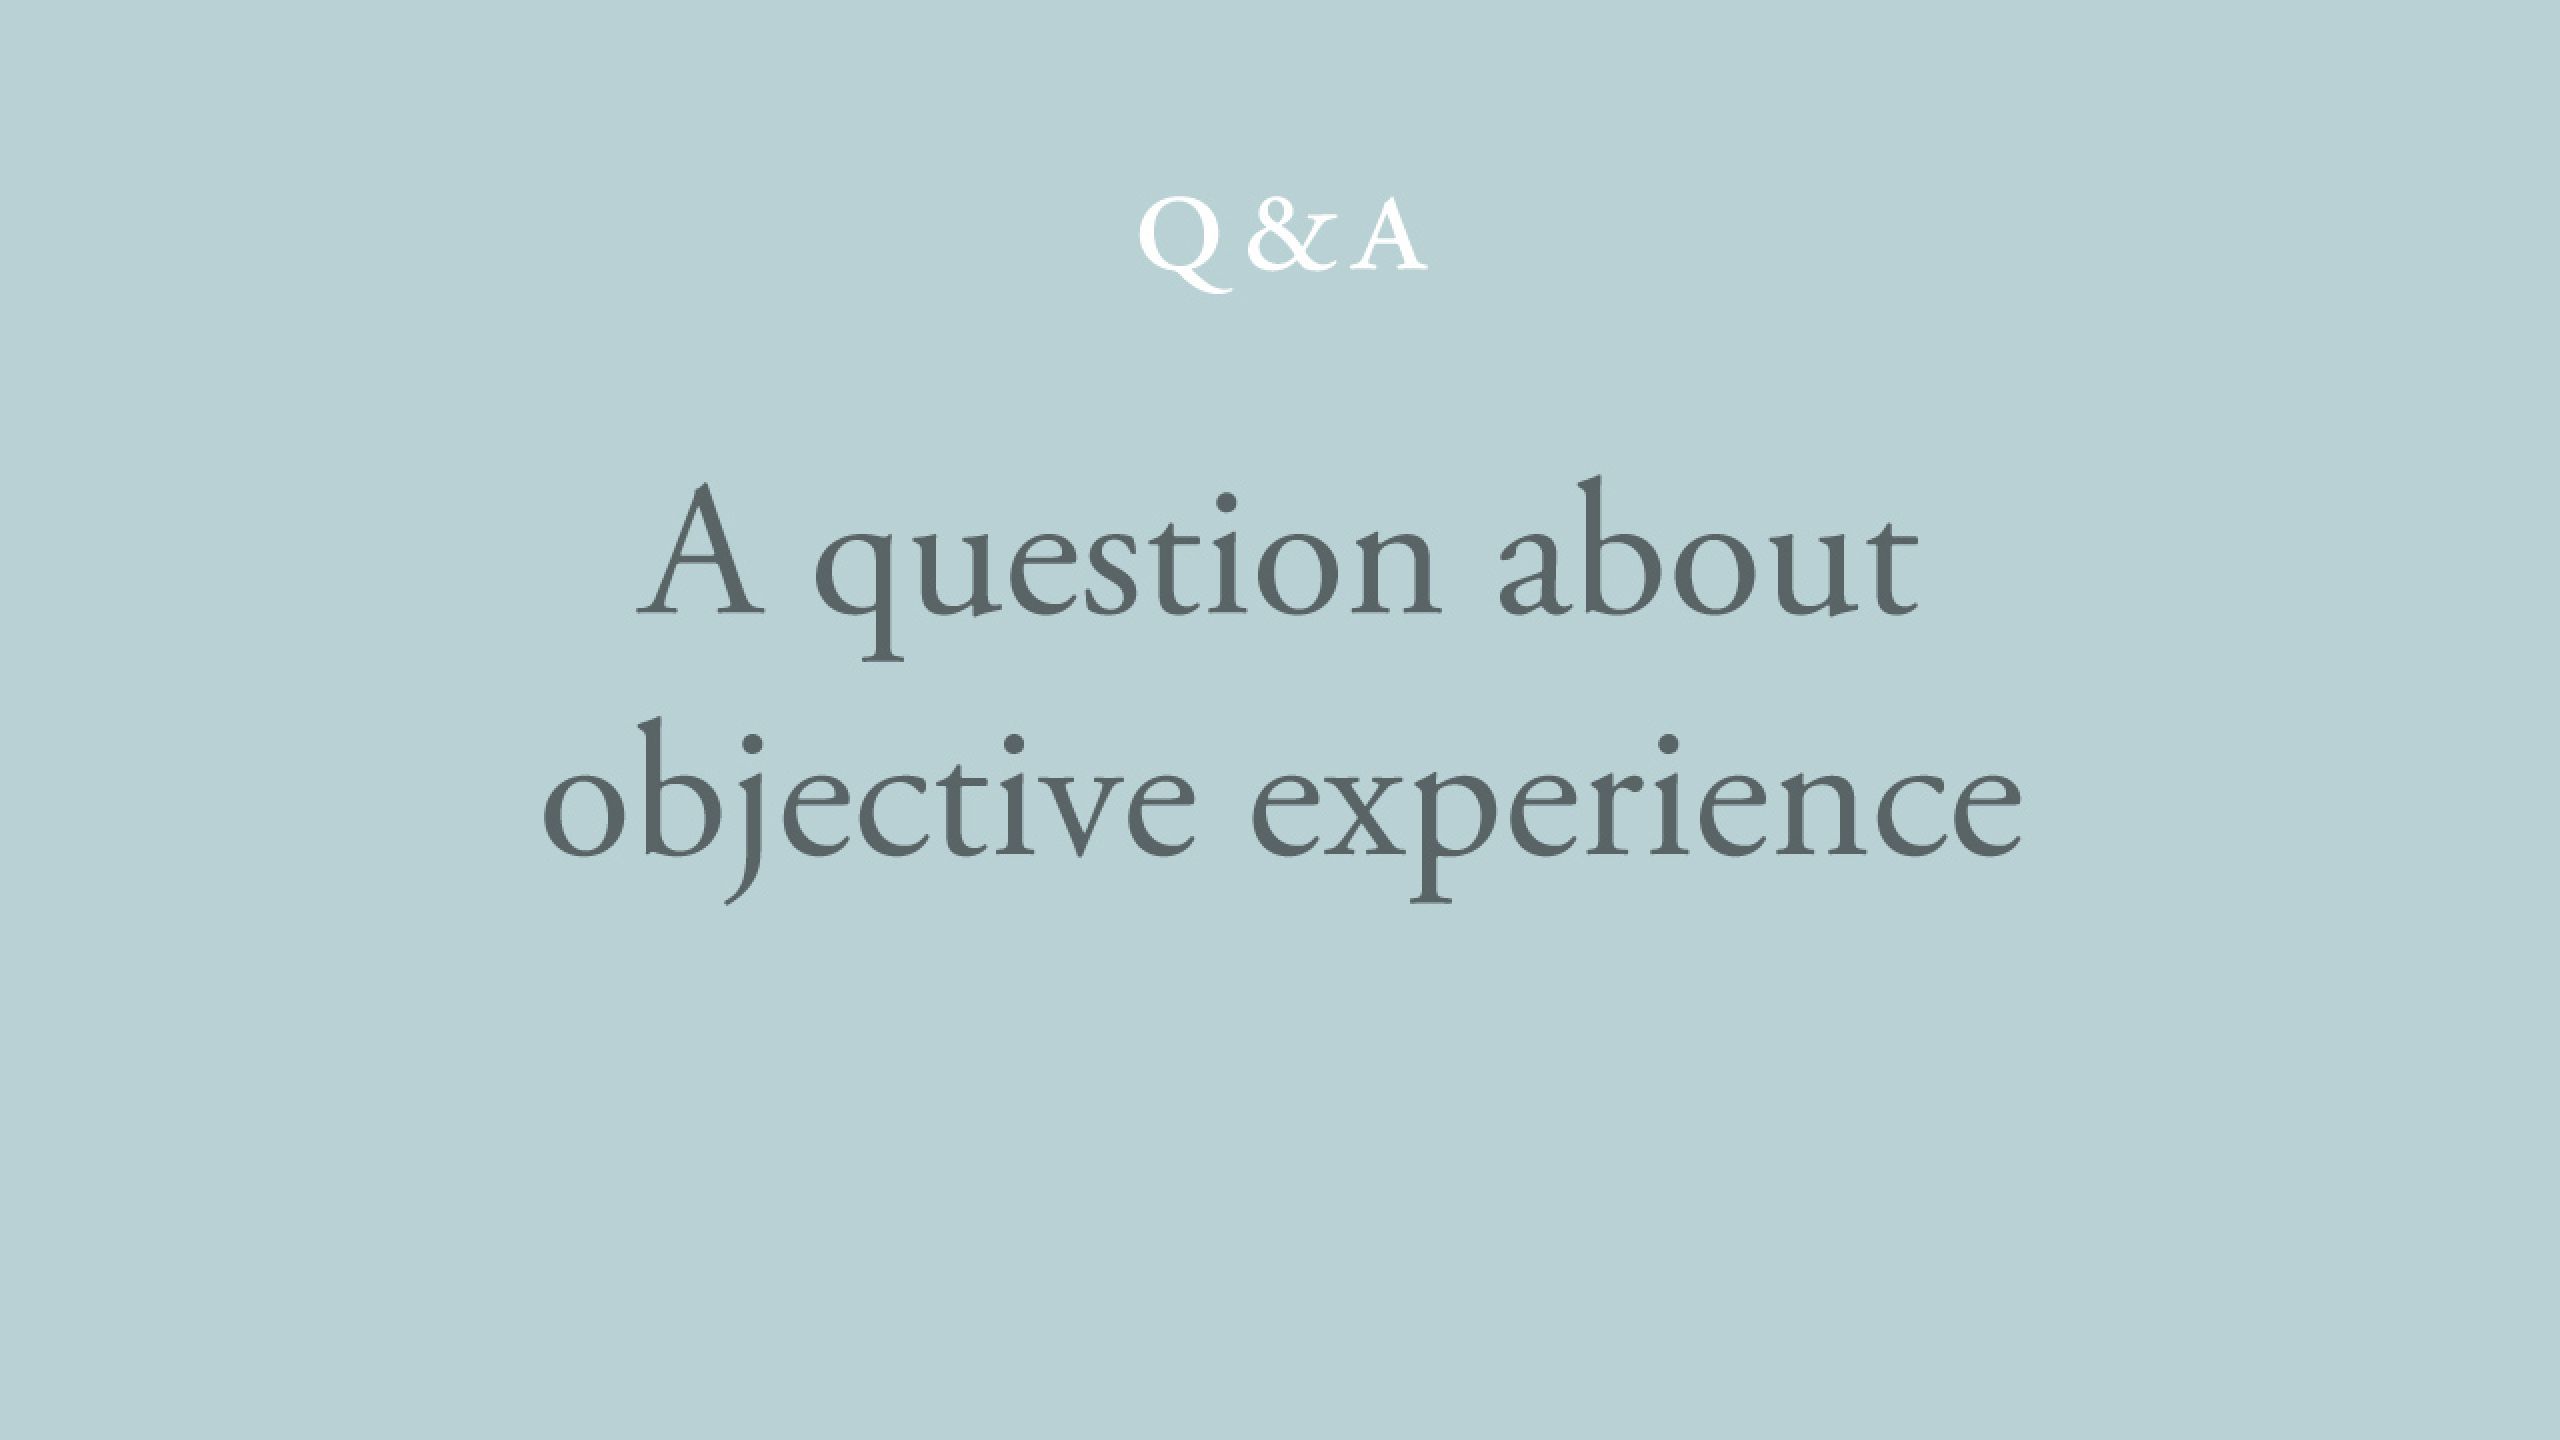 Is it true that objective experience can only take place through the mind?